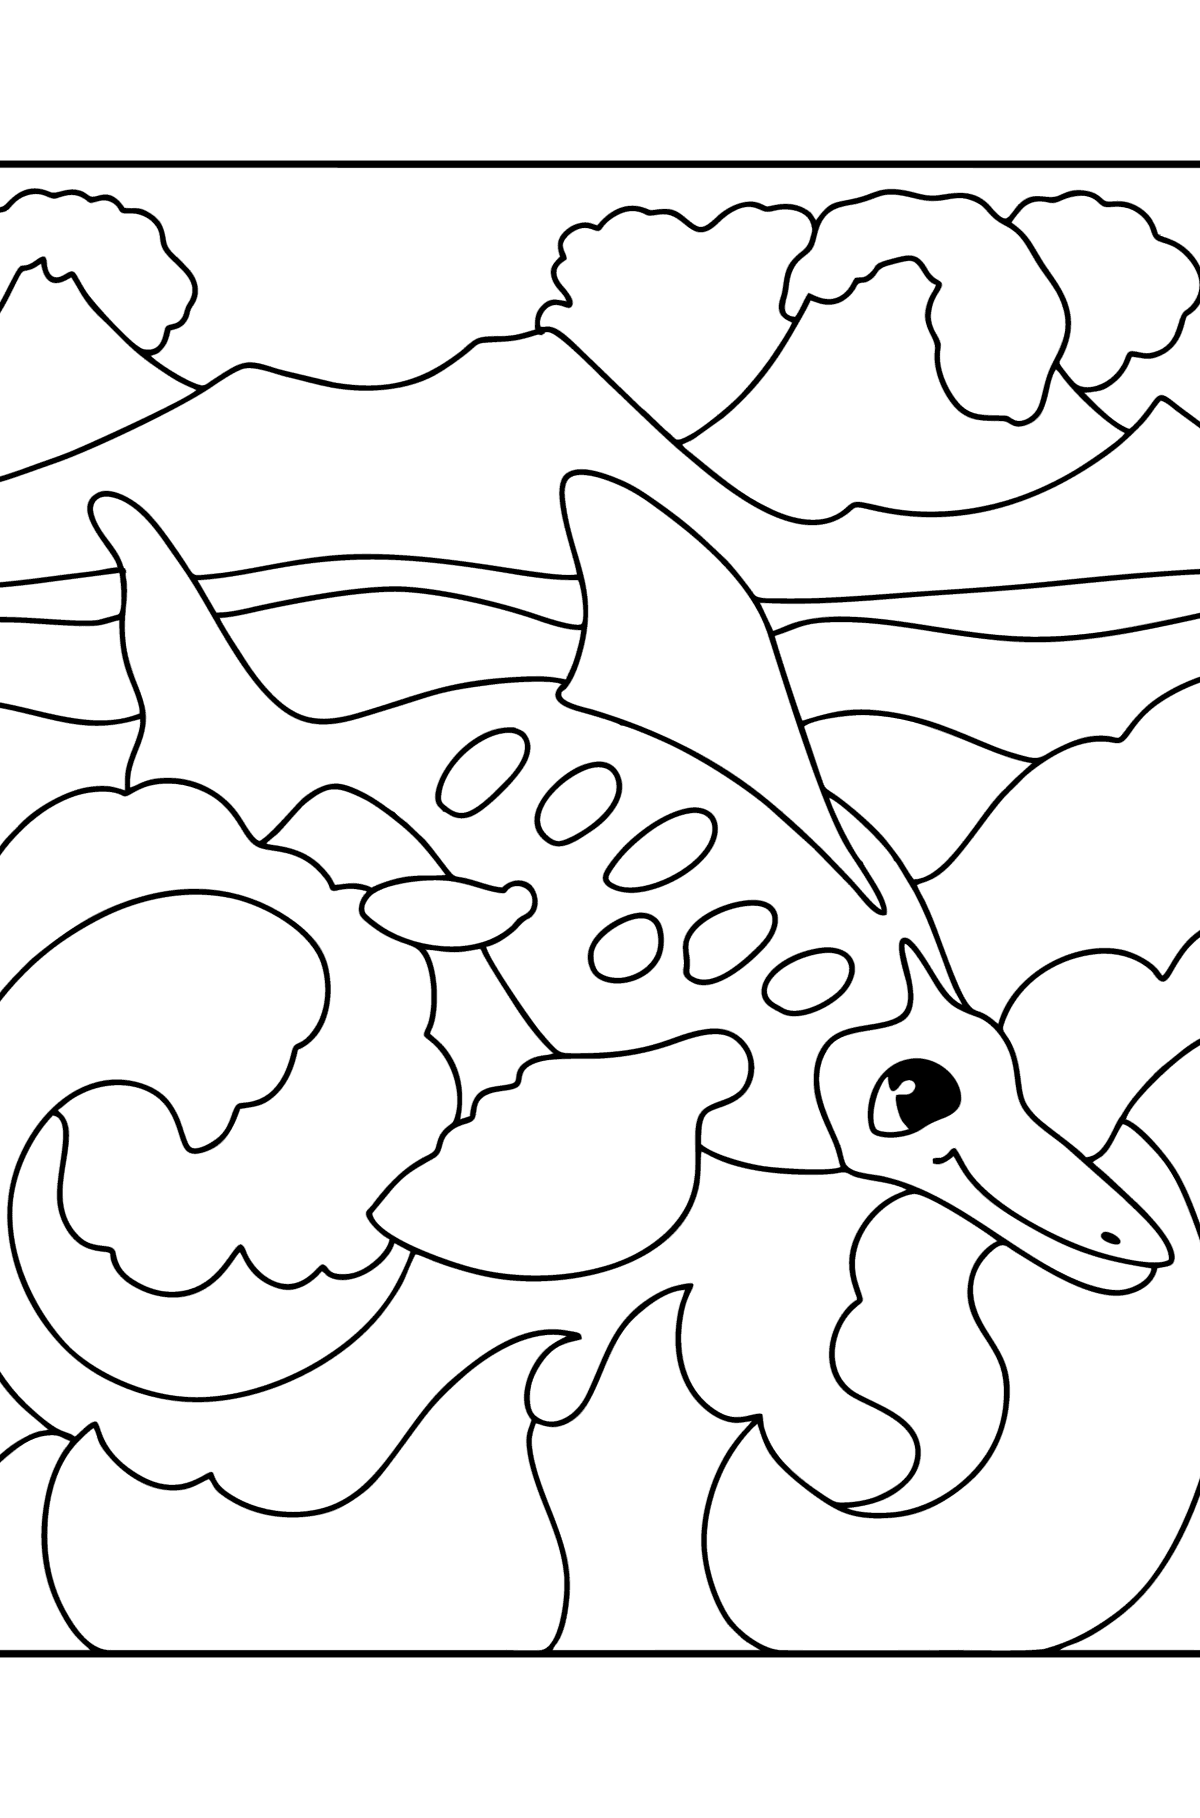 Ichthyosaur coloring page - Coloring Pages for Kids